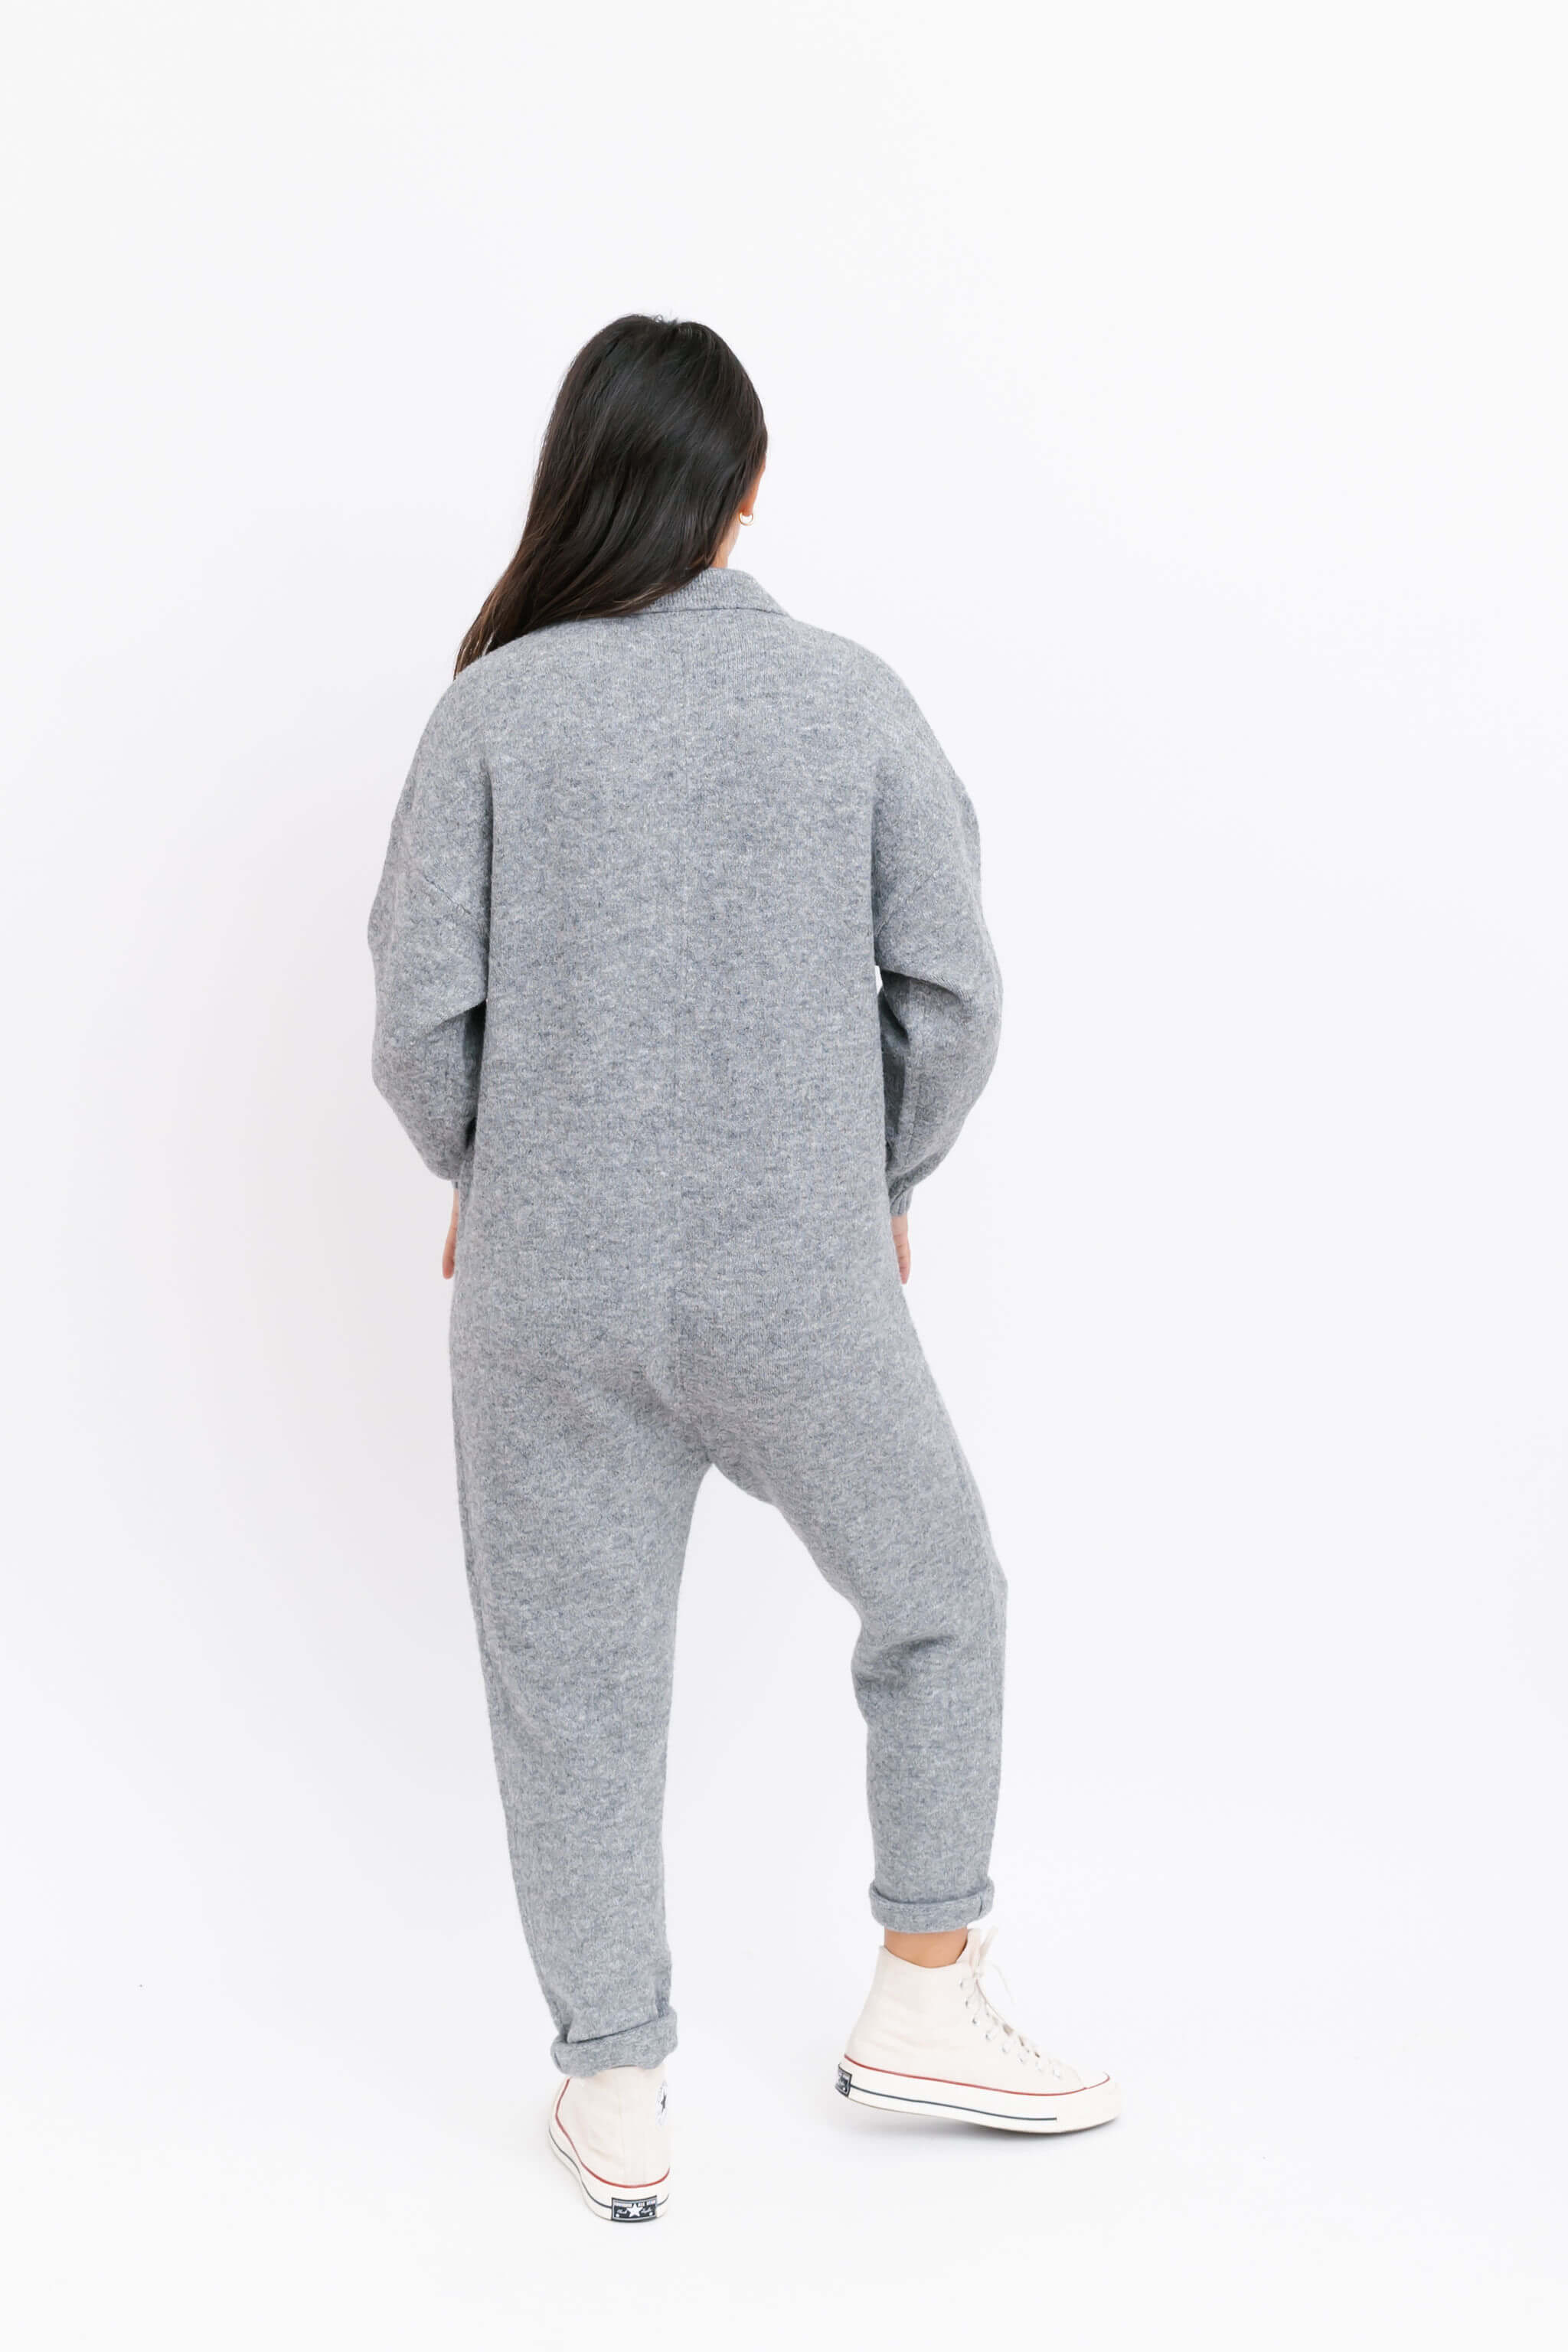 Smash + Tess Florence Jumpsuit in Heather Grey